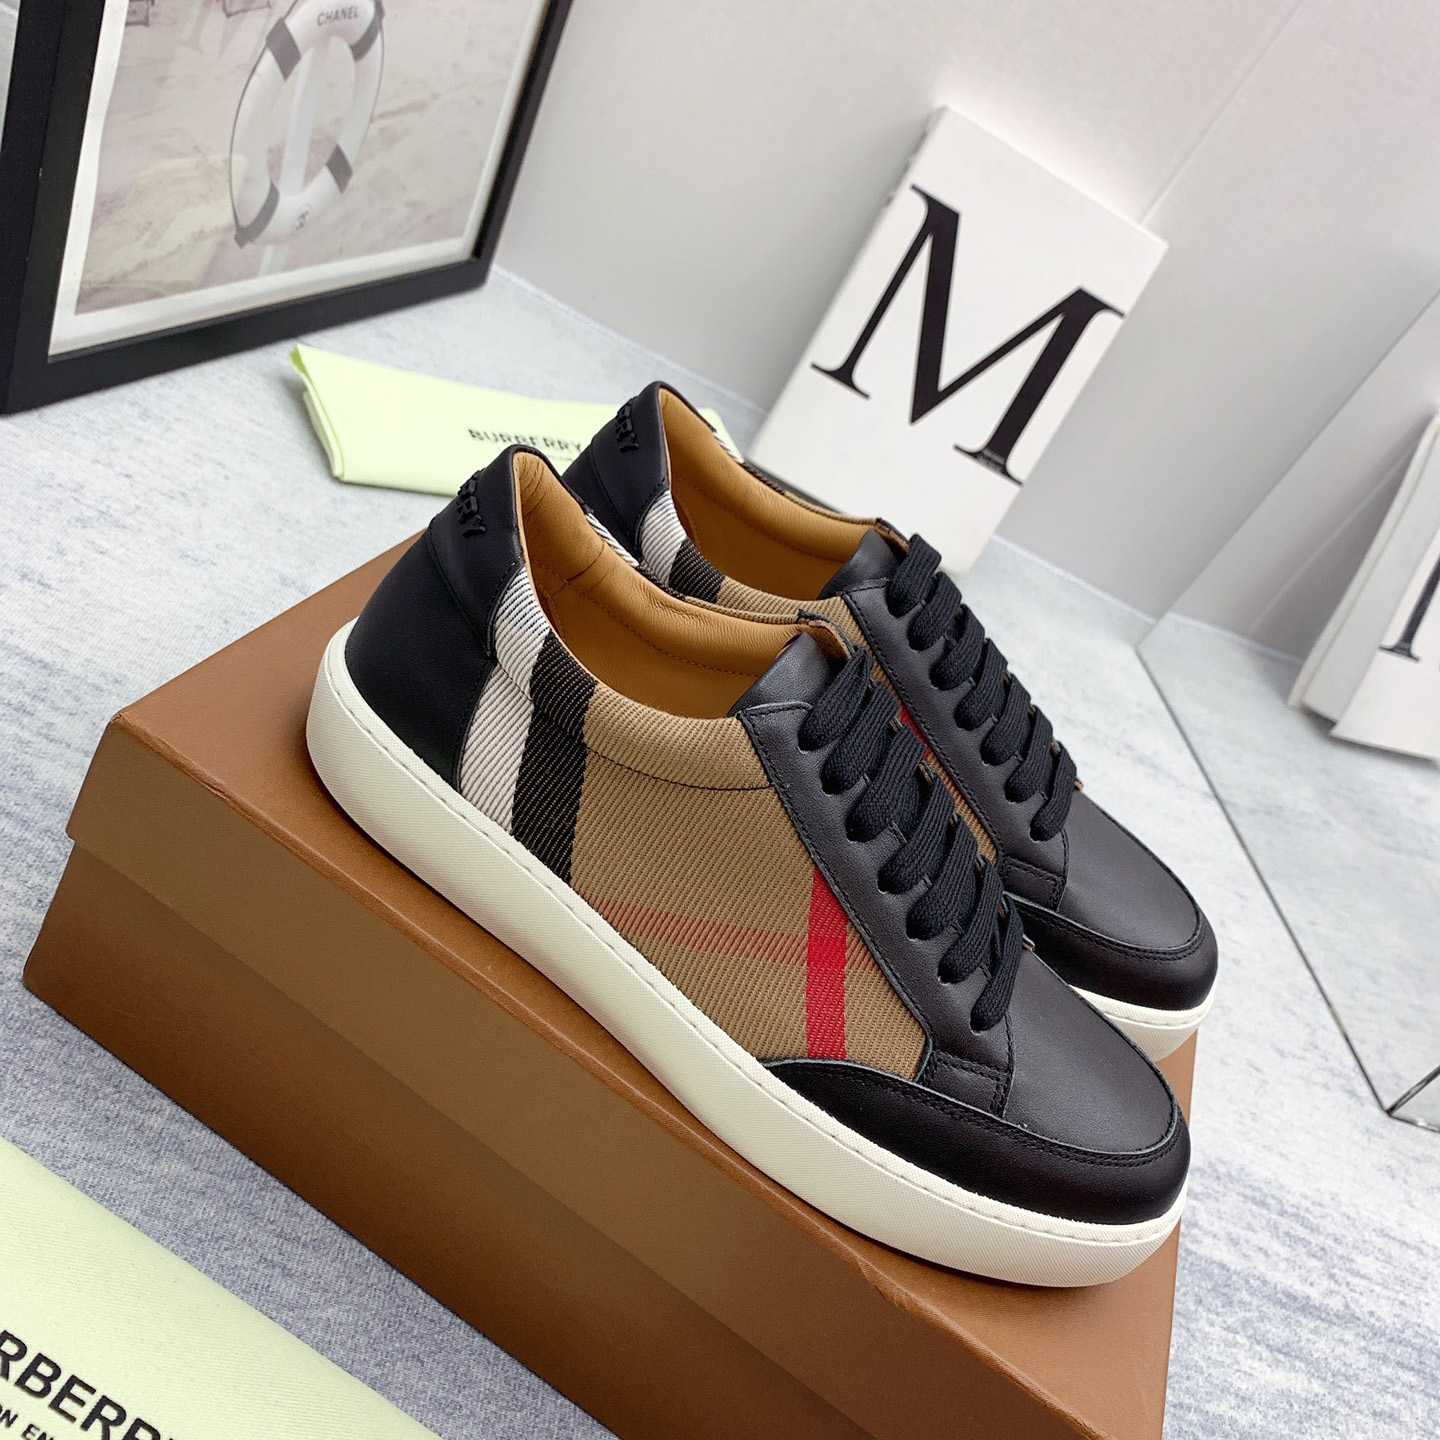 Burberry House Check Cotton And Leather Sneakers - DesignerGu